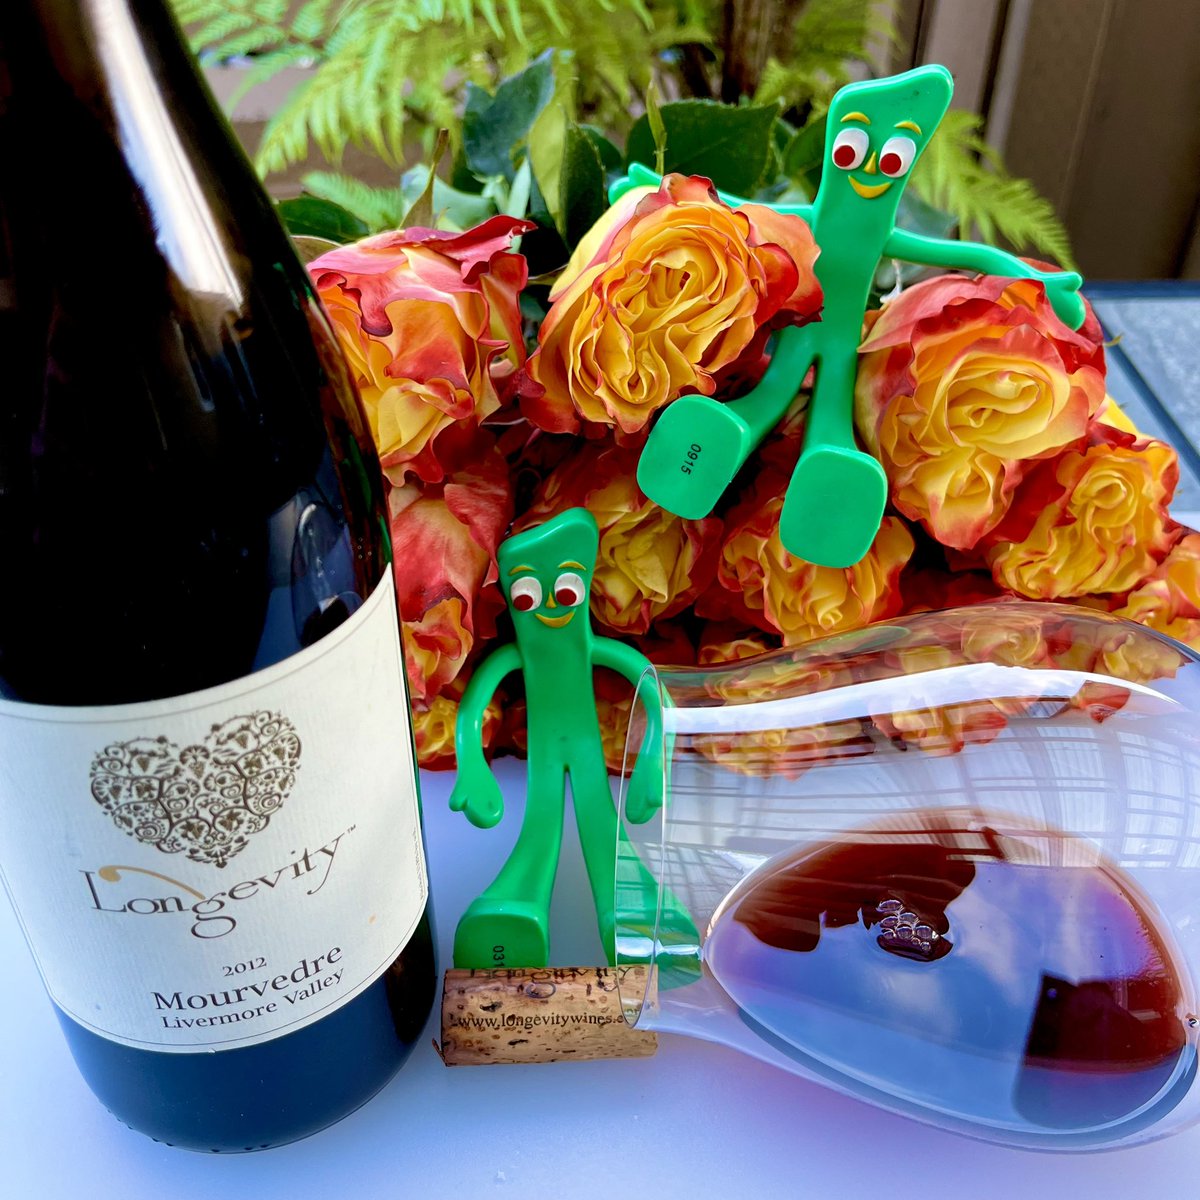 Today is #NationalRoseDay with a Livermore Valley Mourvèdre by @Longevitywines. This is showing a nose of Black plum, violets and black raspberry with flavors of blackberry, cigar tobacco and mild pepper. Cheers. @boozychef @JAndrewFlorezII @AskRobY @RedWineCats @Kerryloves2trvl